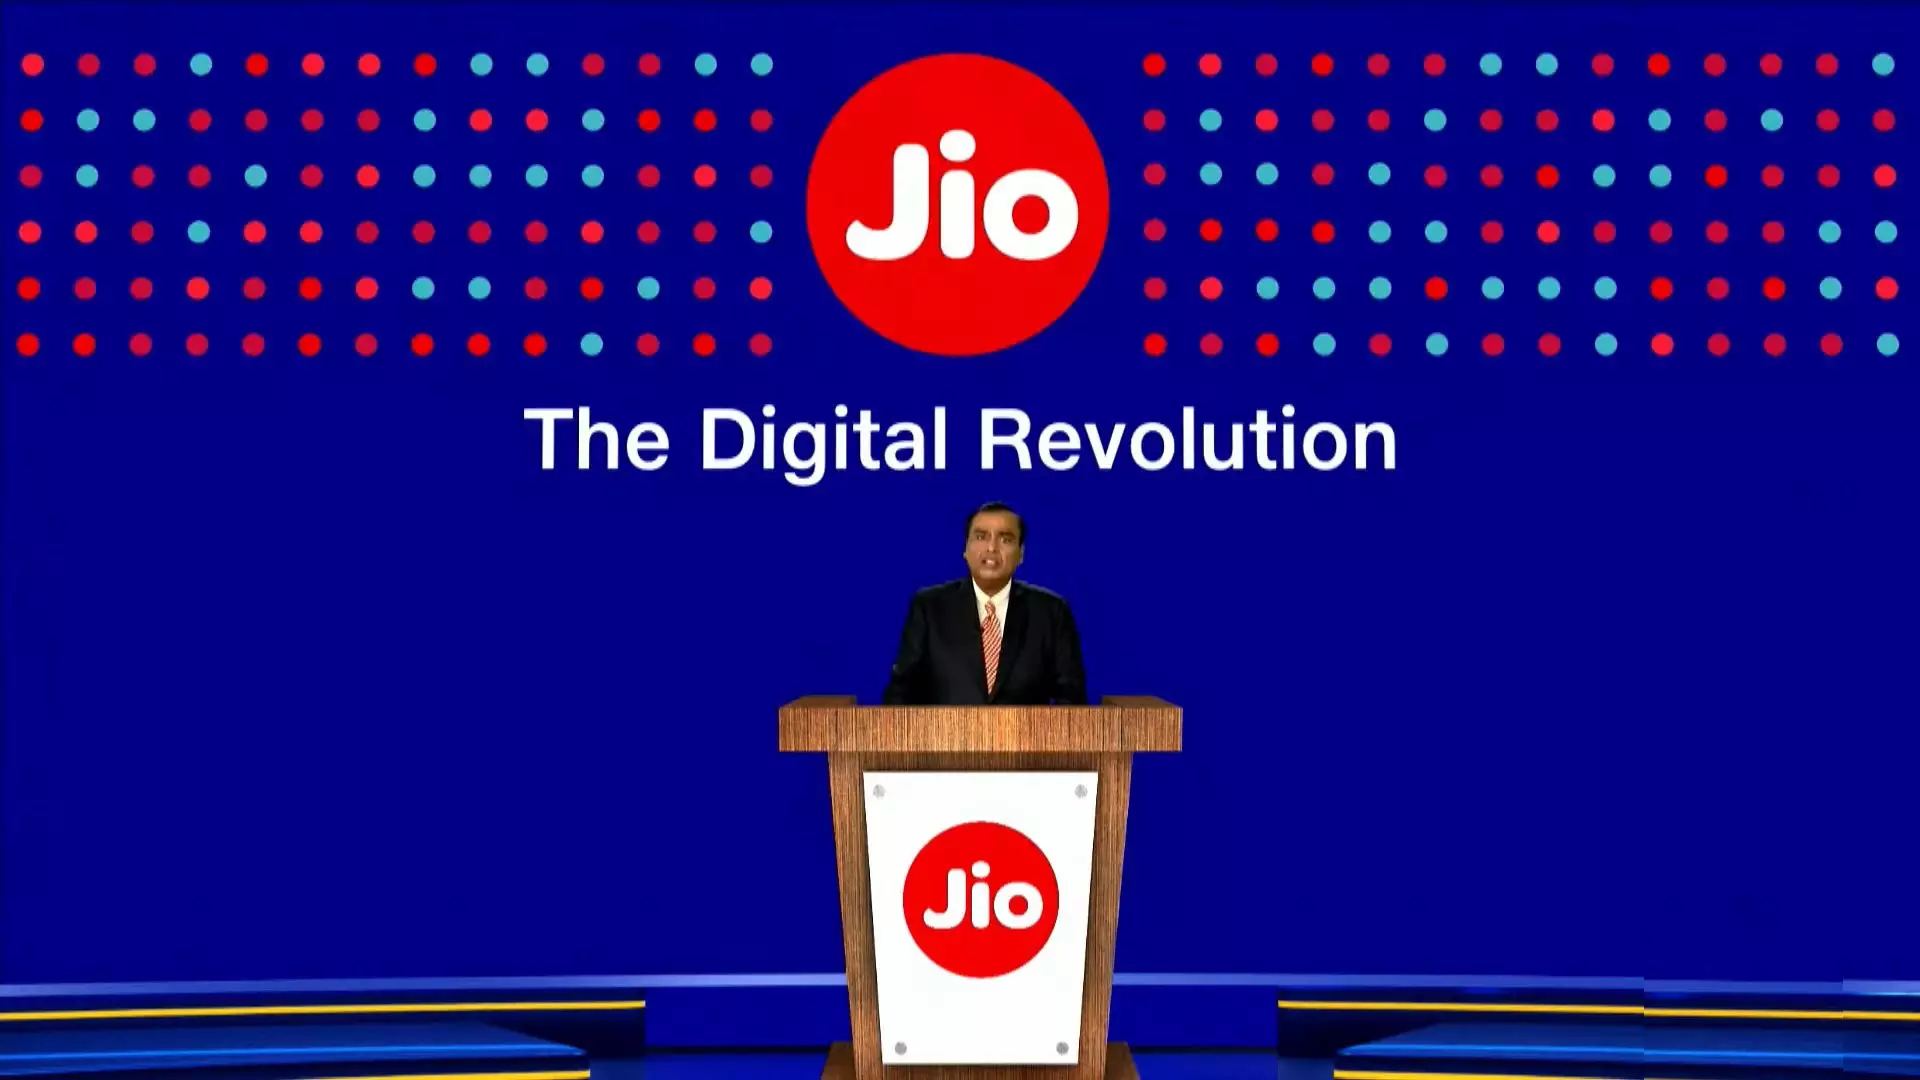 Jio Financial Services seeks shareholders nod to raise FDI limit up to 49%